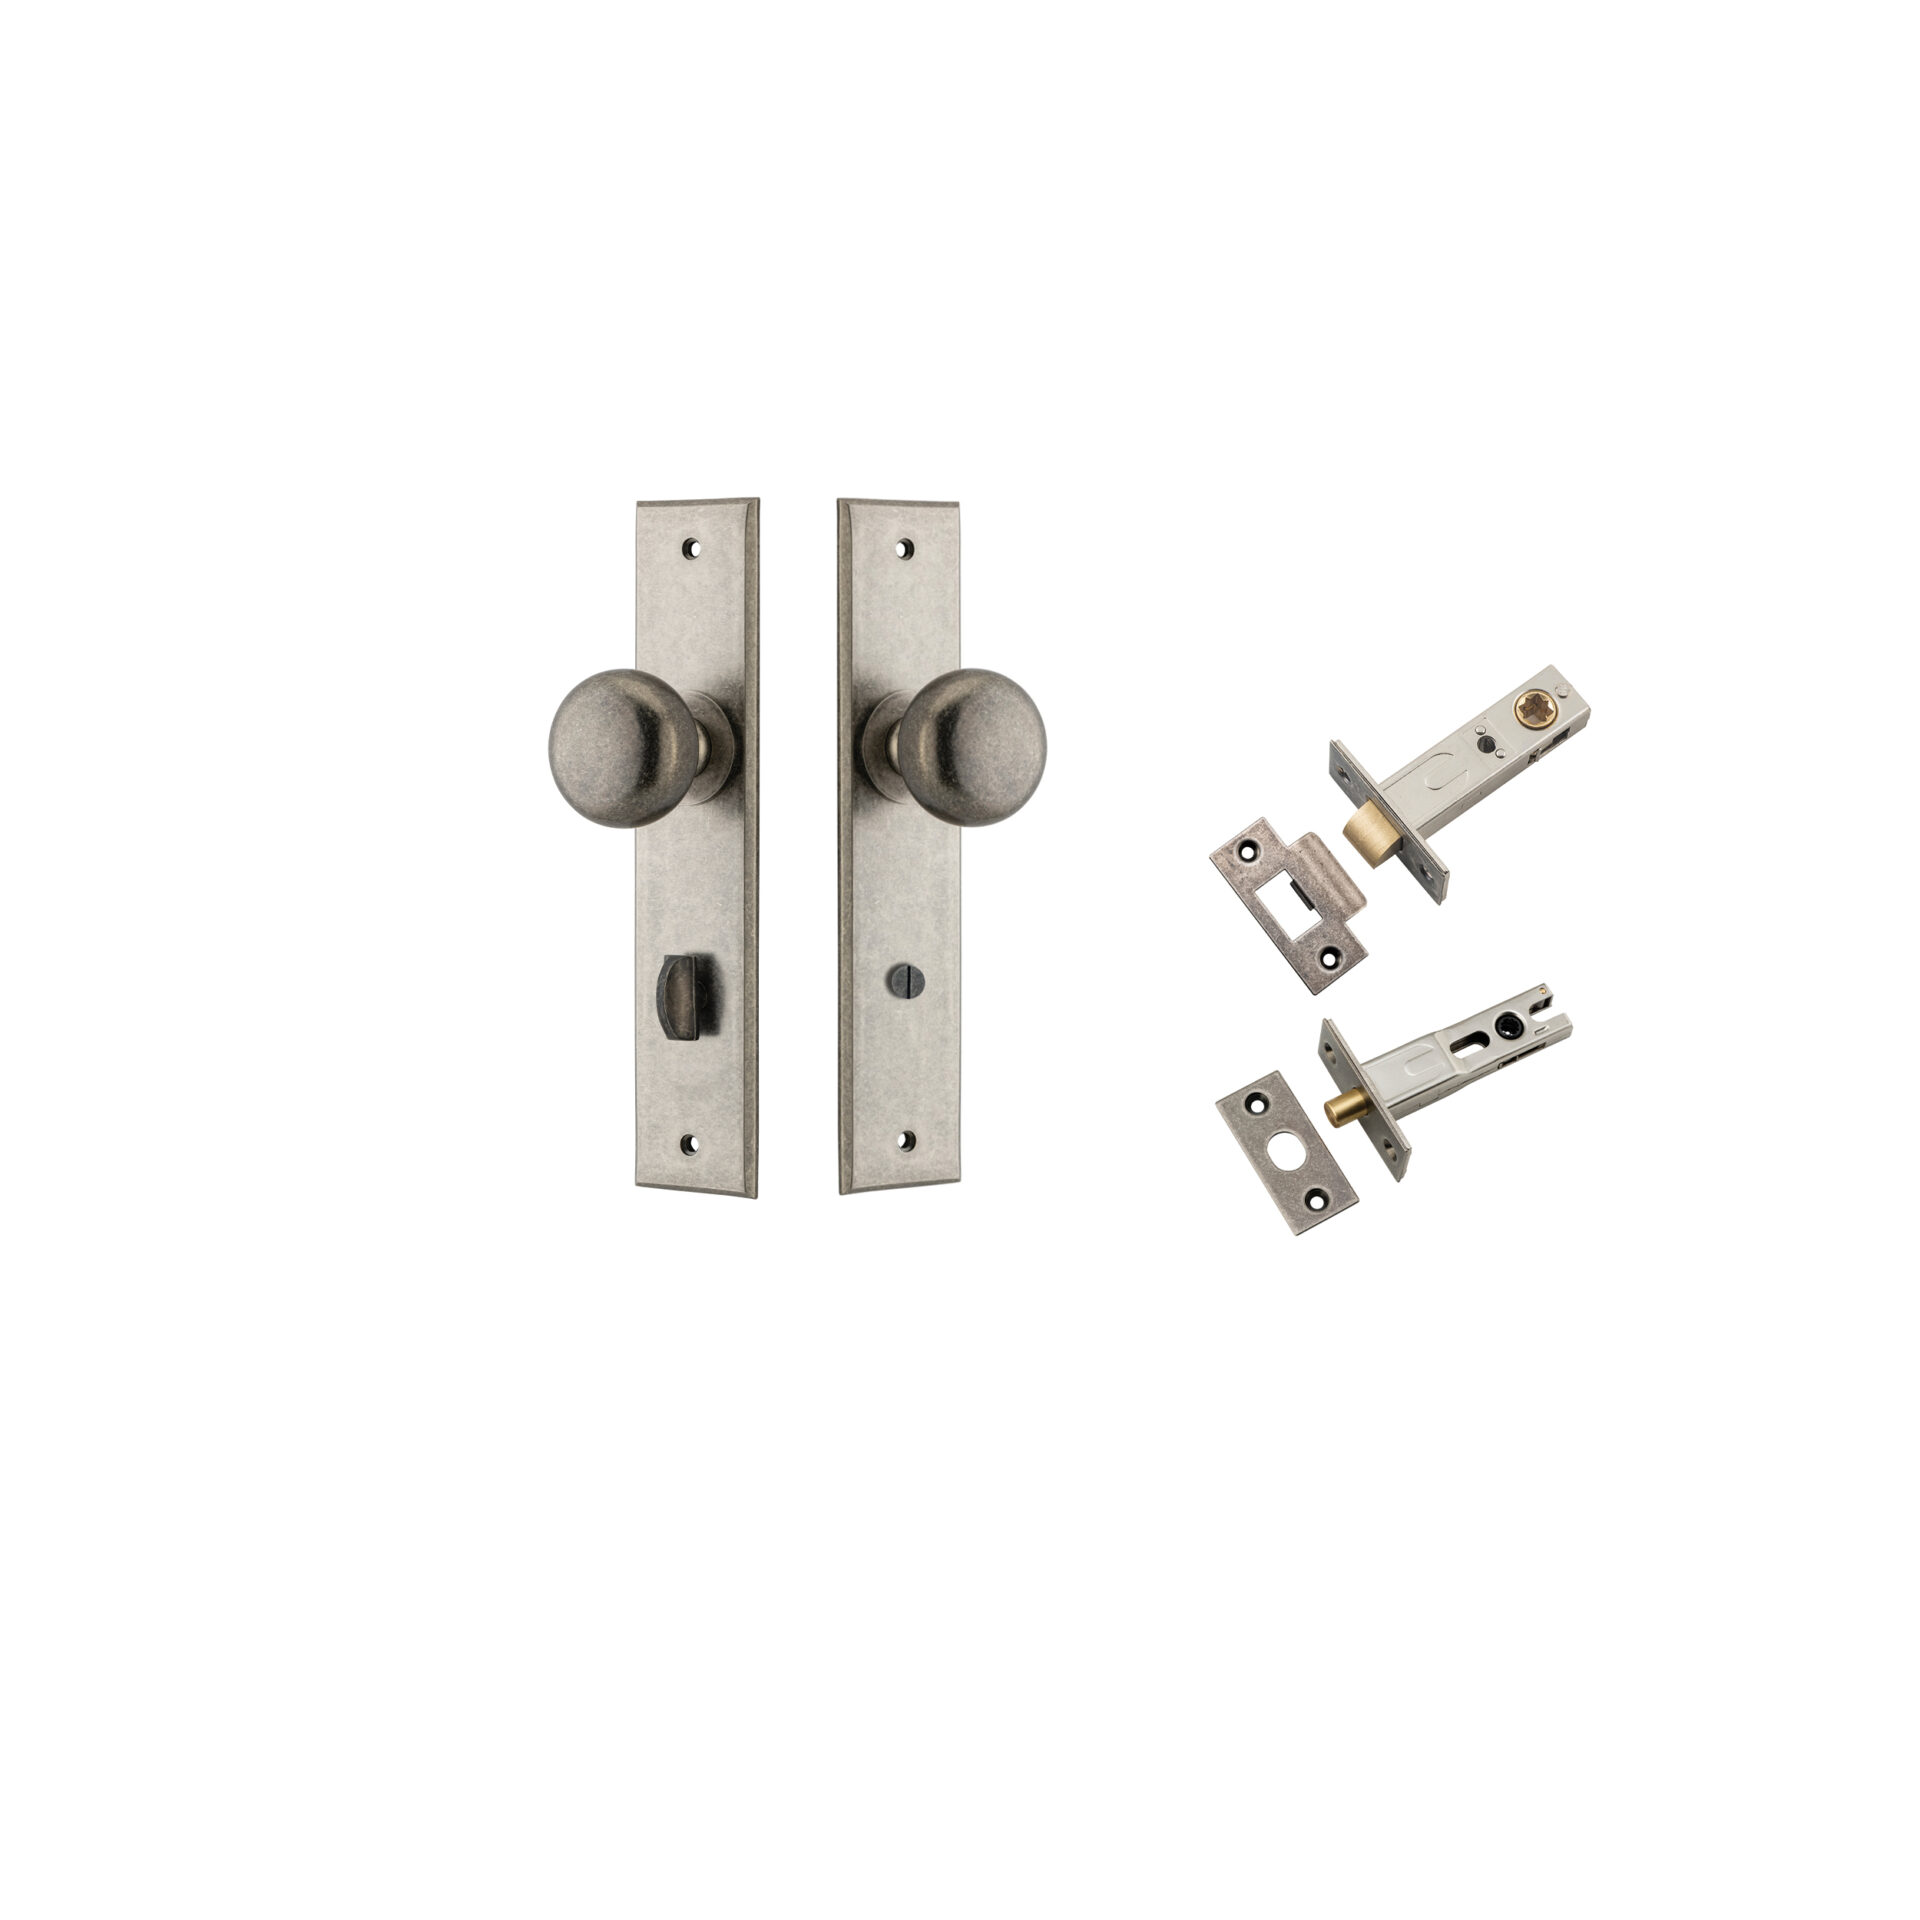 13946KPRIV60 - Cambridge Knob - Chamfered Backplate Privacy Kit with Privacy Turn - Distressed Nickel - Privacy